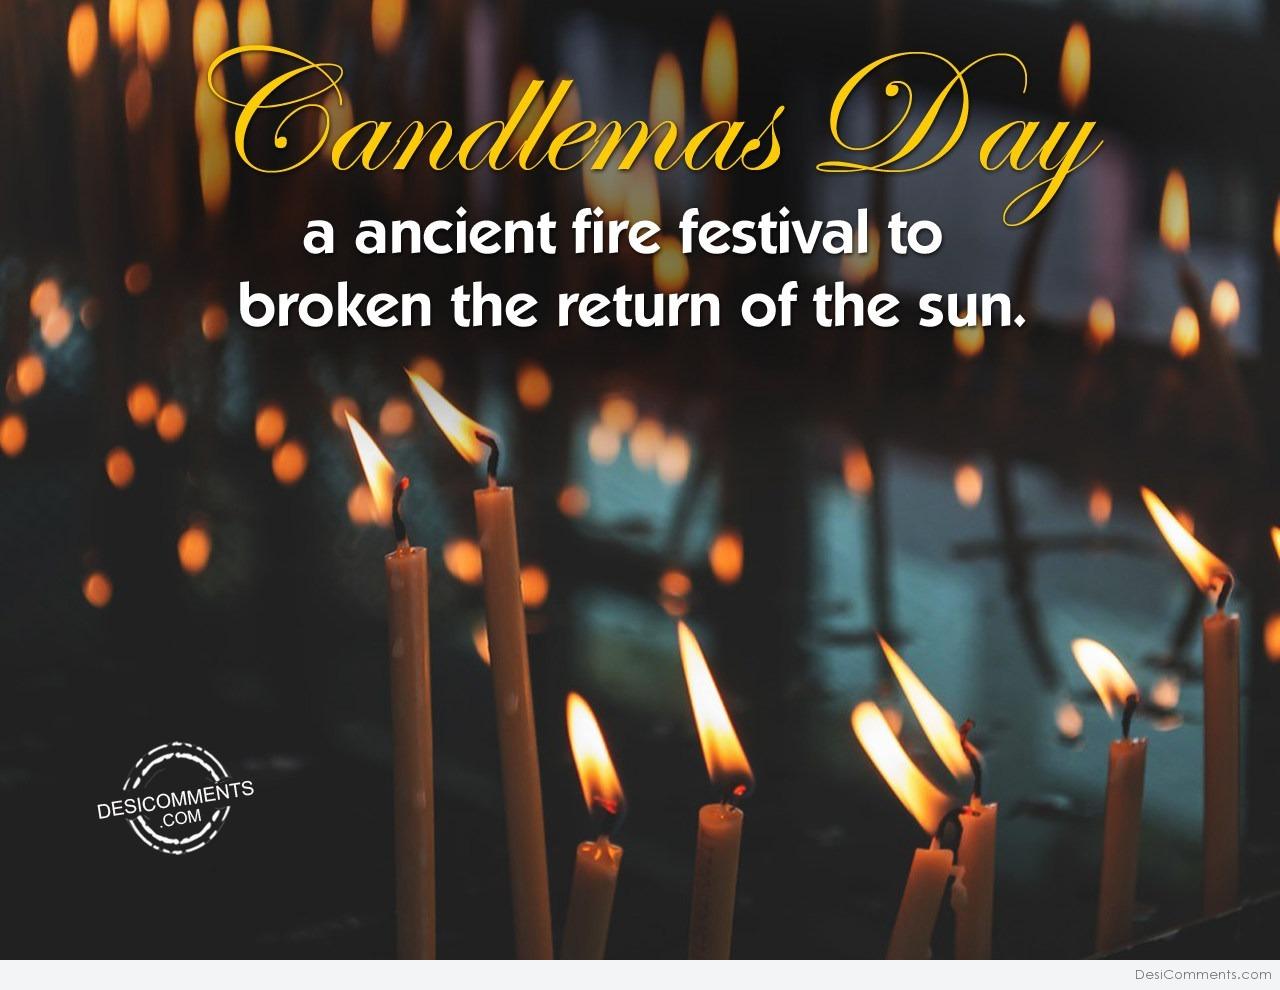 9 Candlemas Day Pictures, Images, Photos